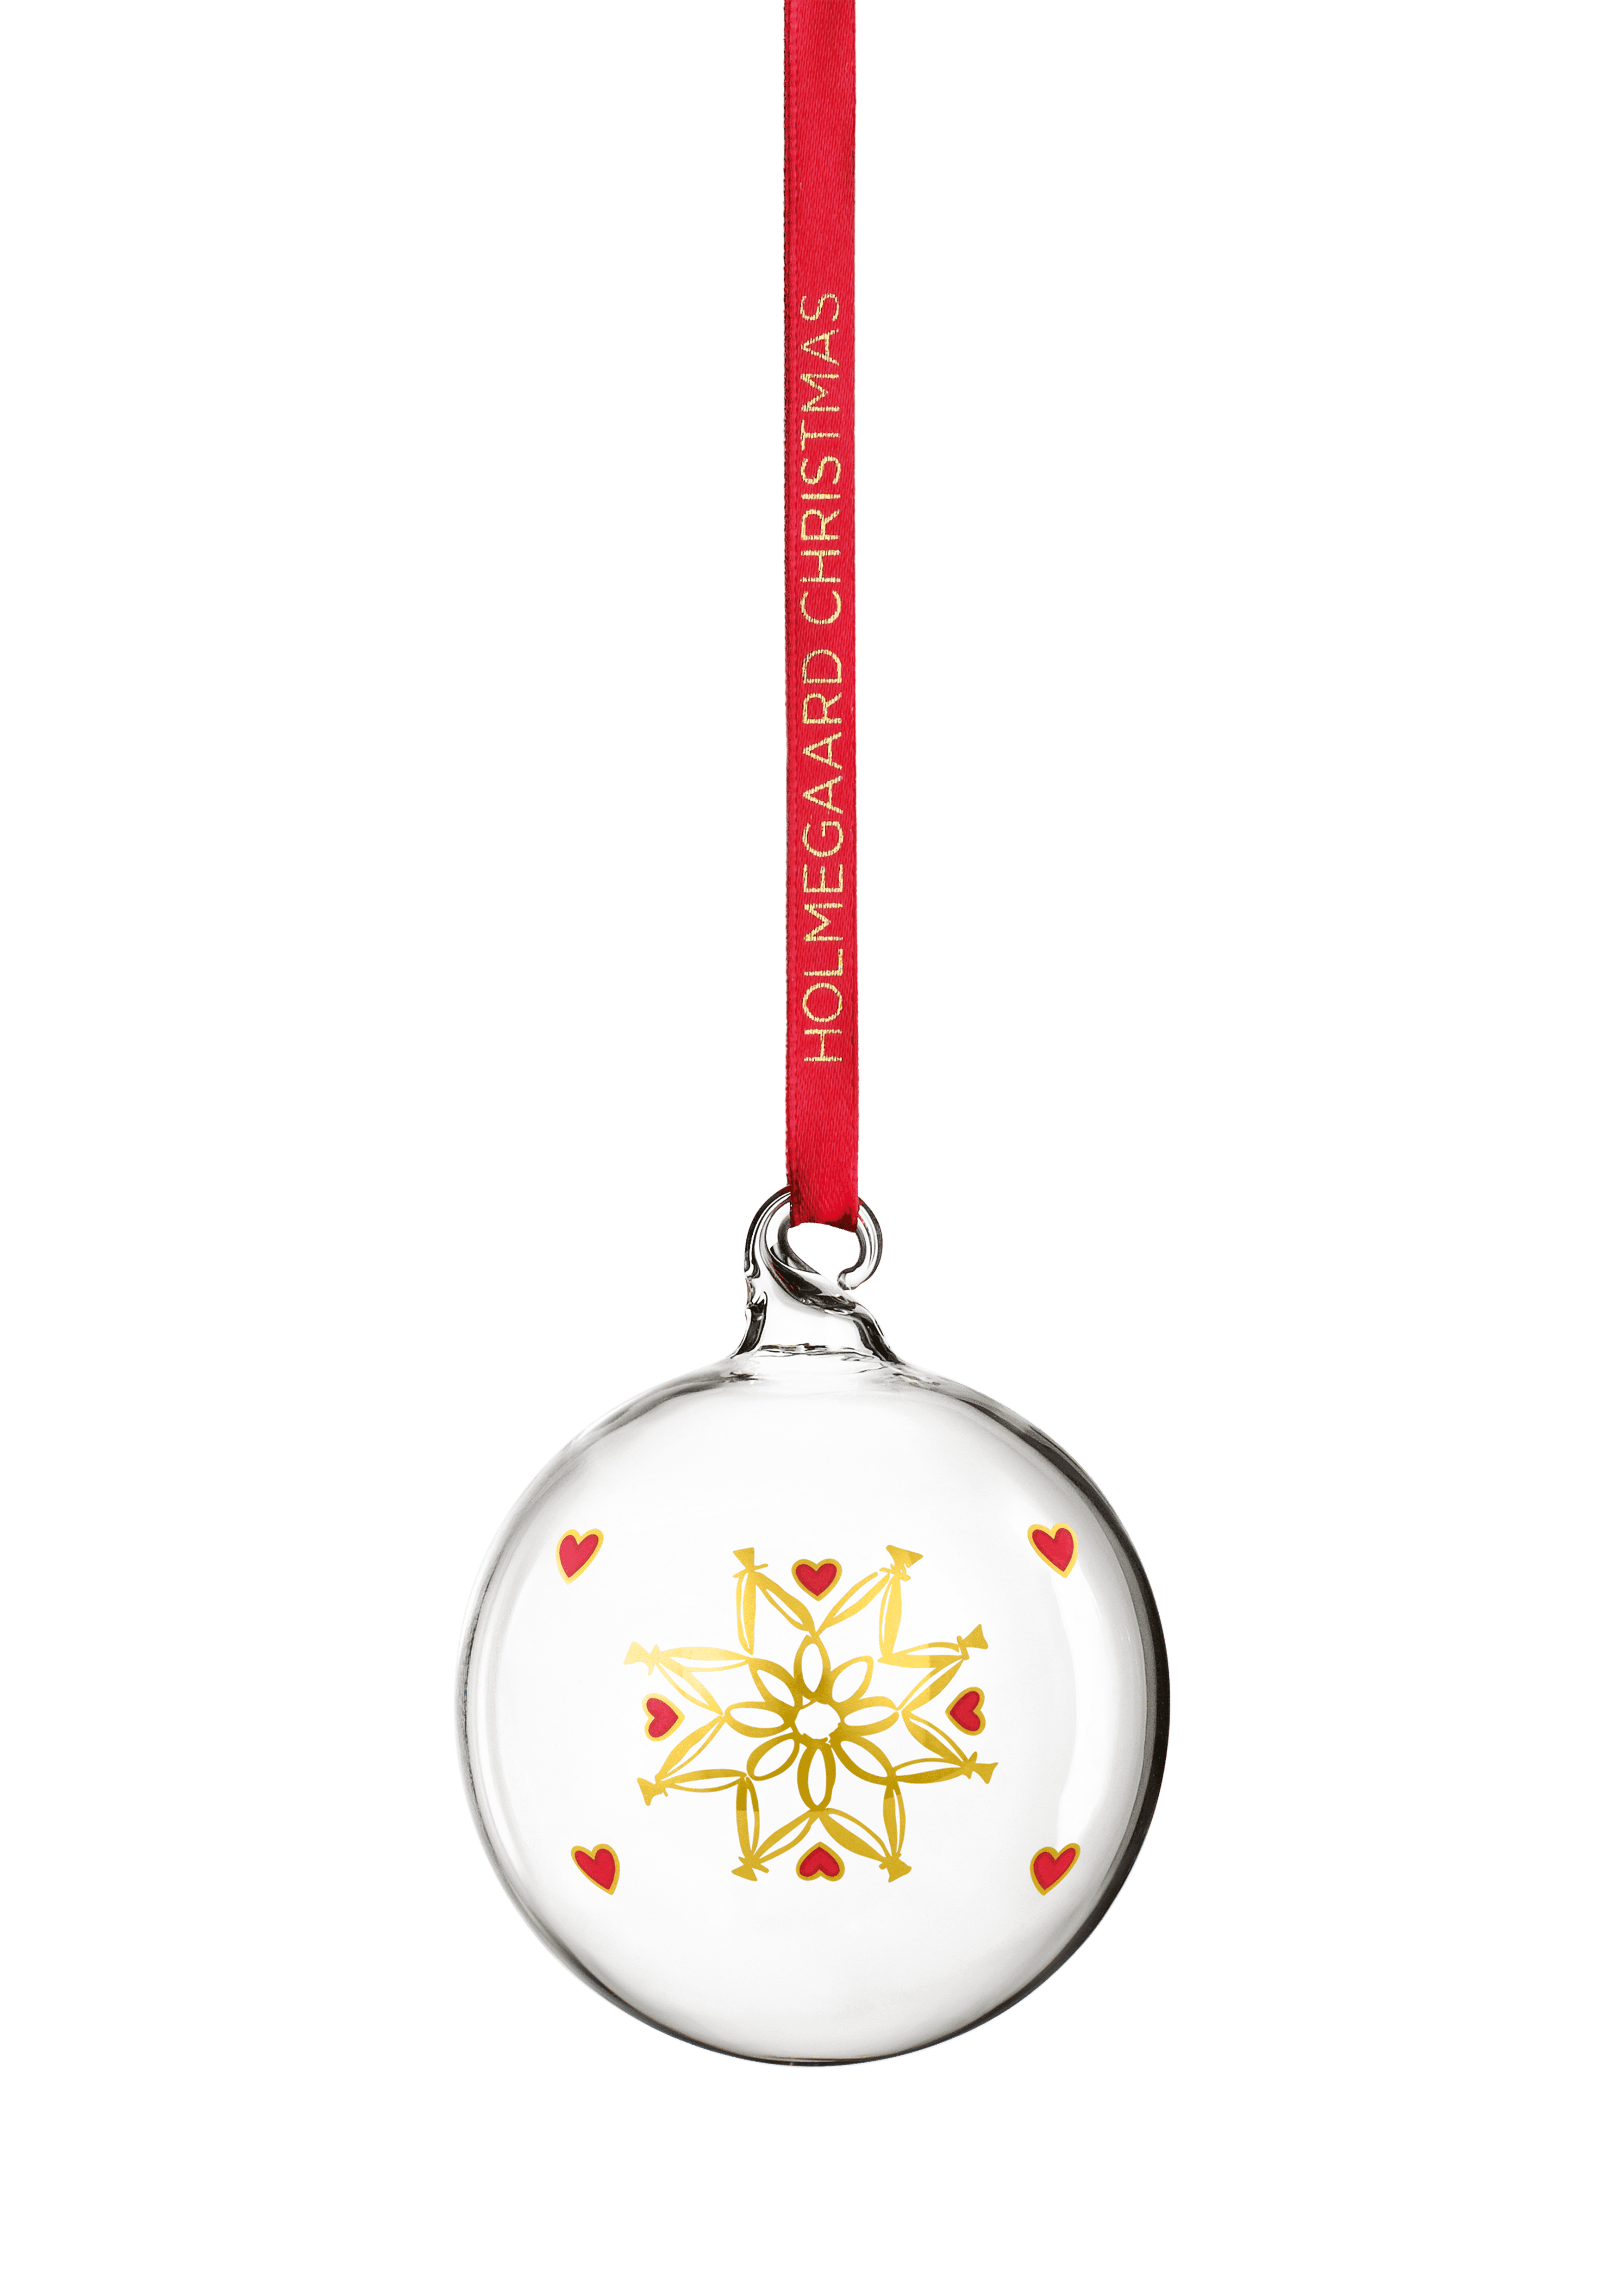 Annual Christmas Bauble 2021 small